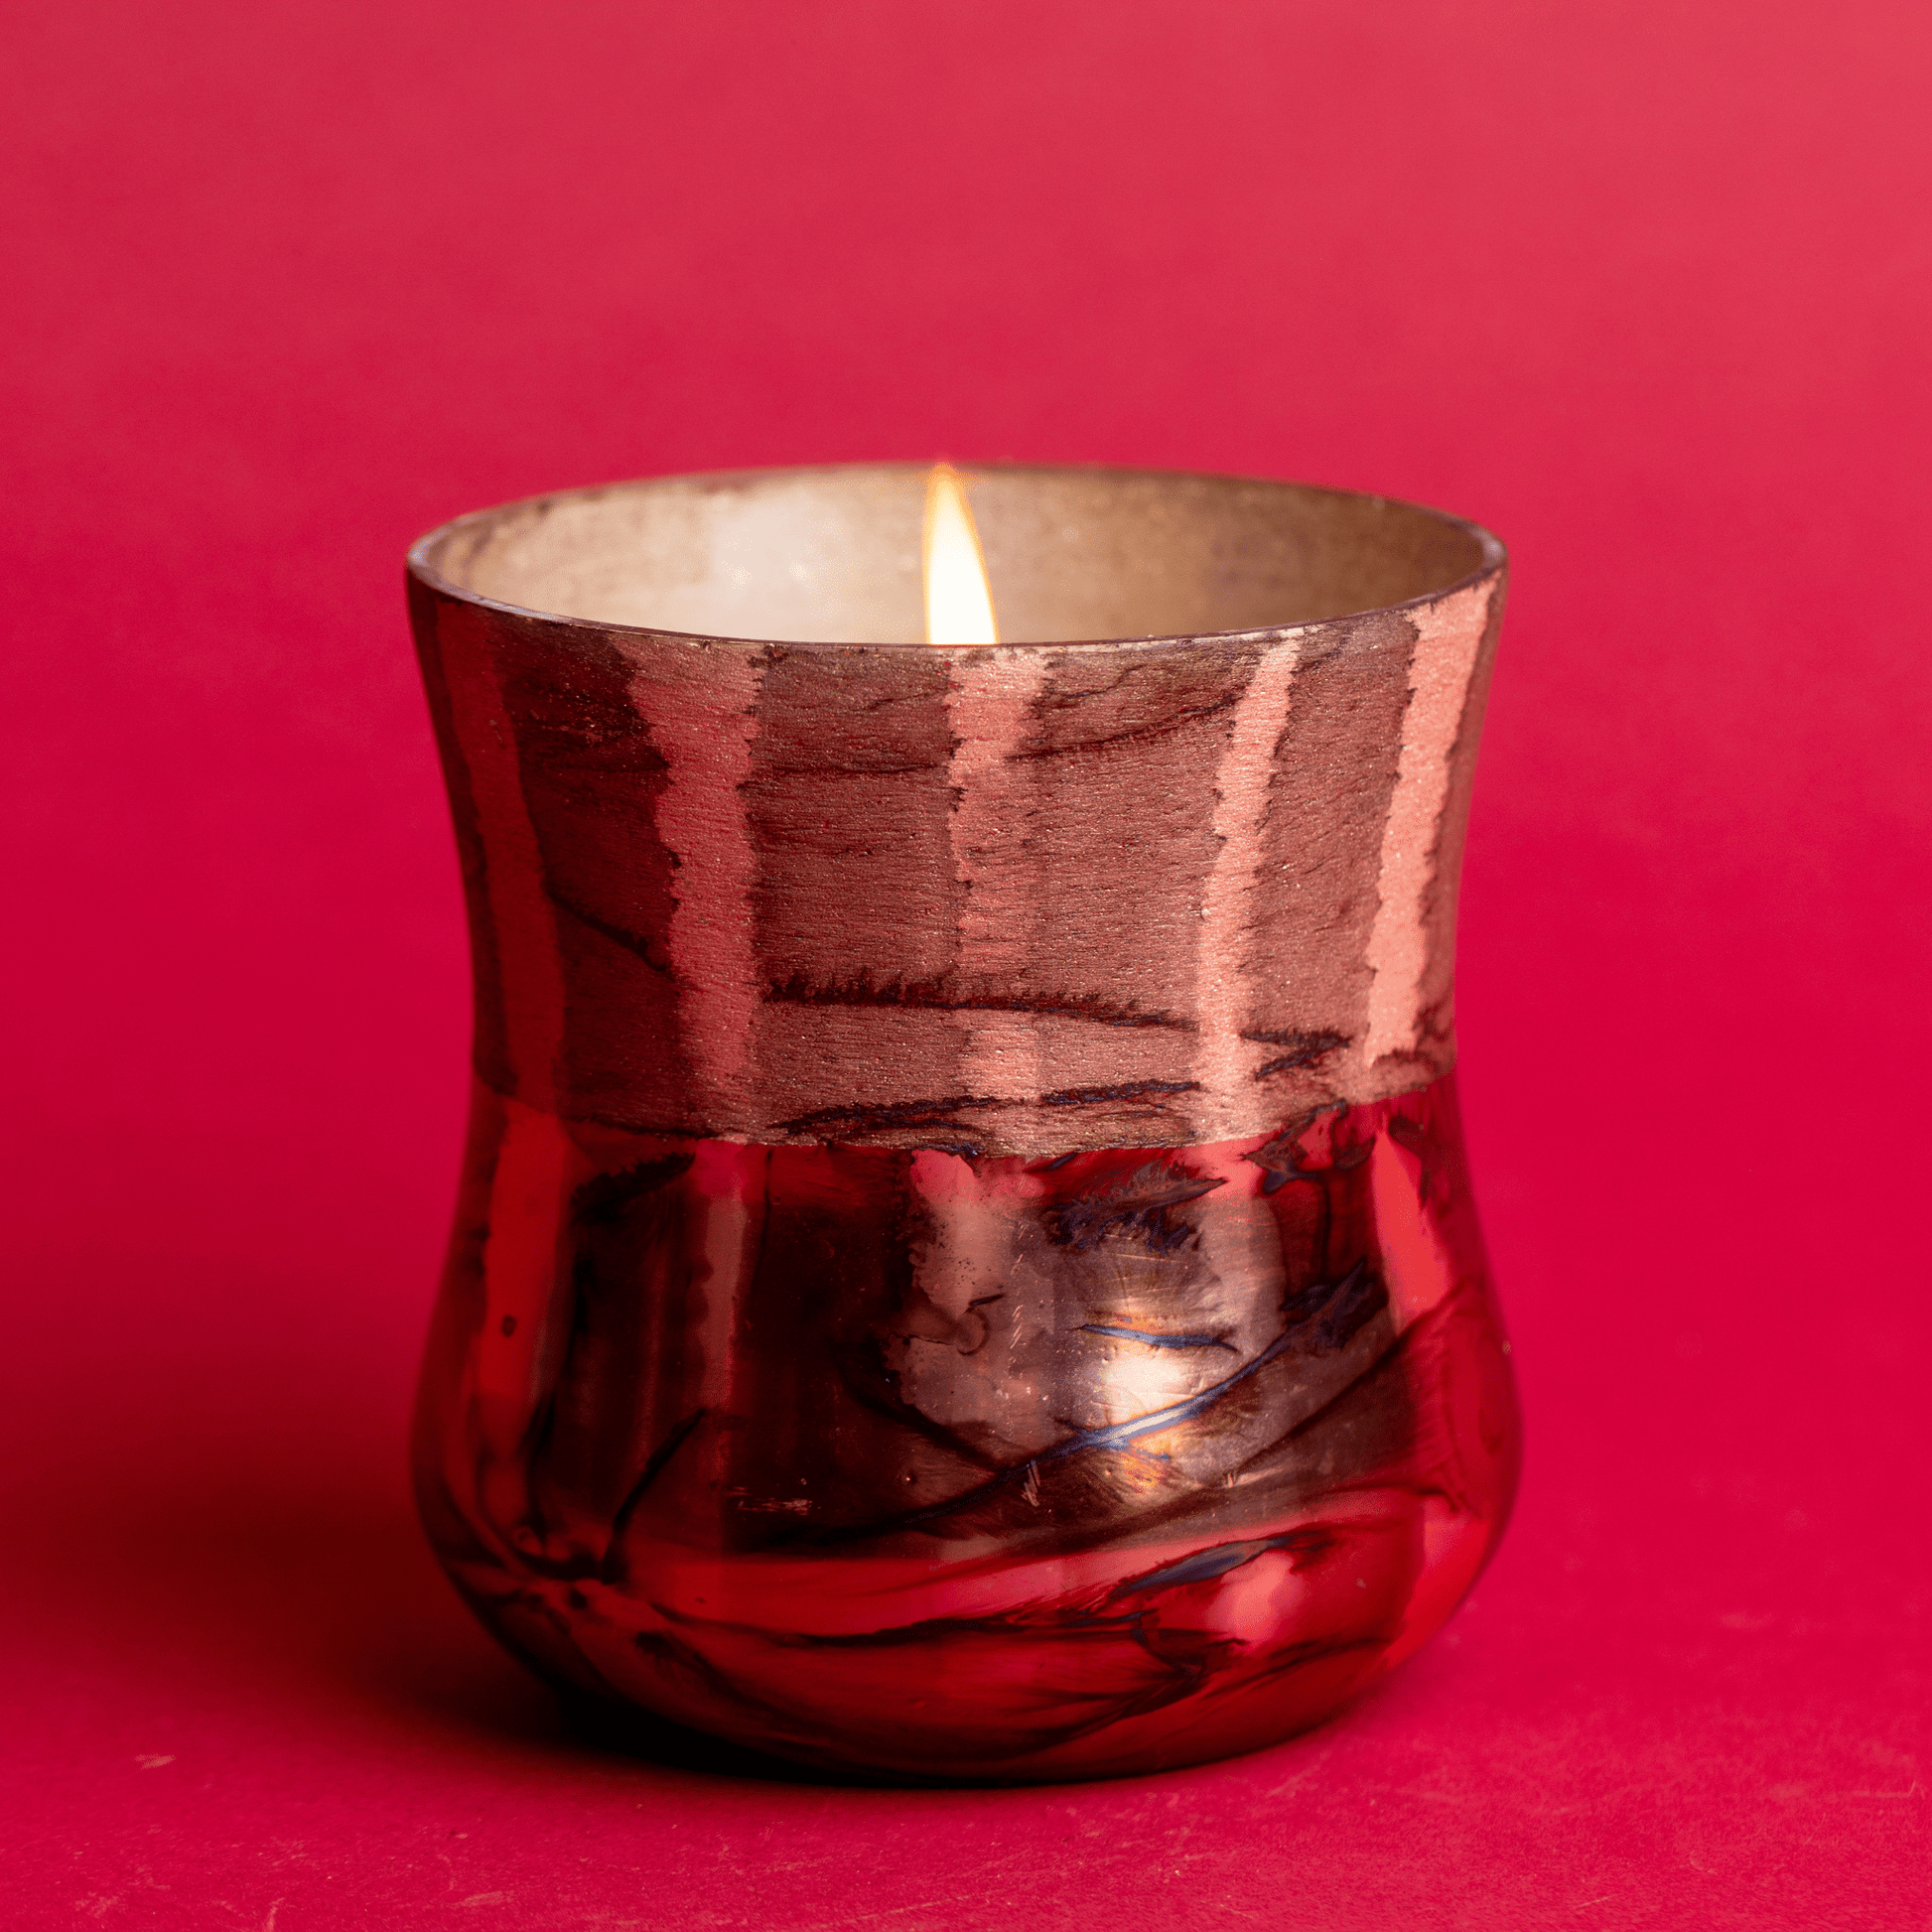 Lit Cypress & Fir - 9oz Frosted & Shiny Copper Metallic Glass candle on a red background.